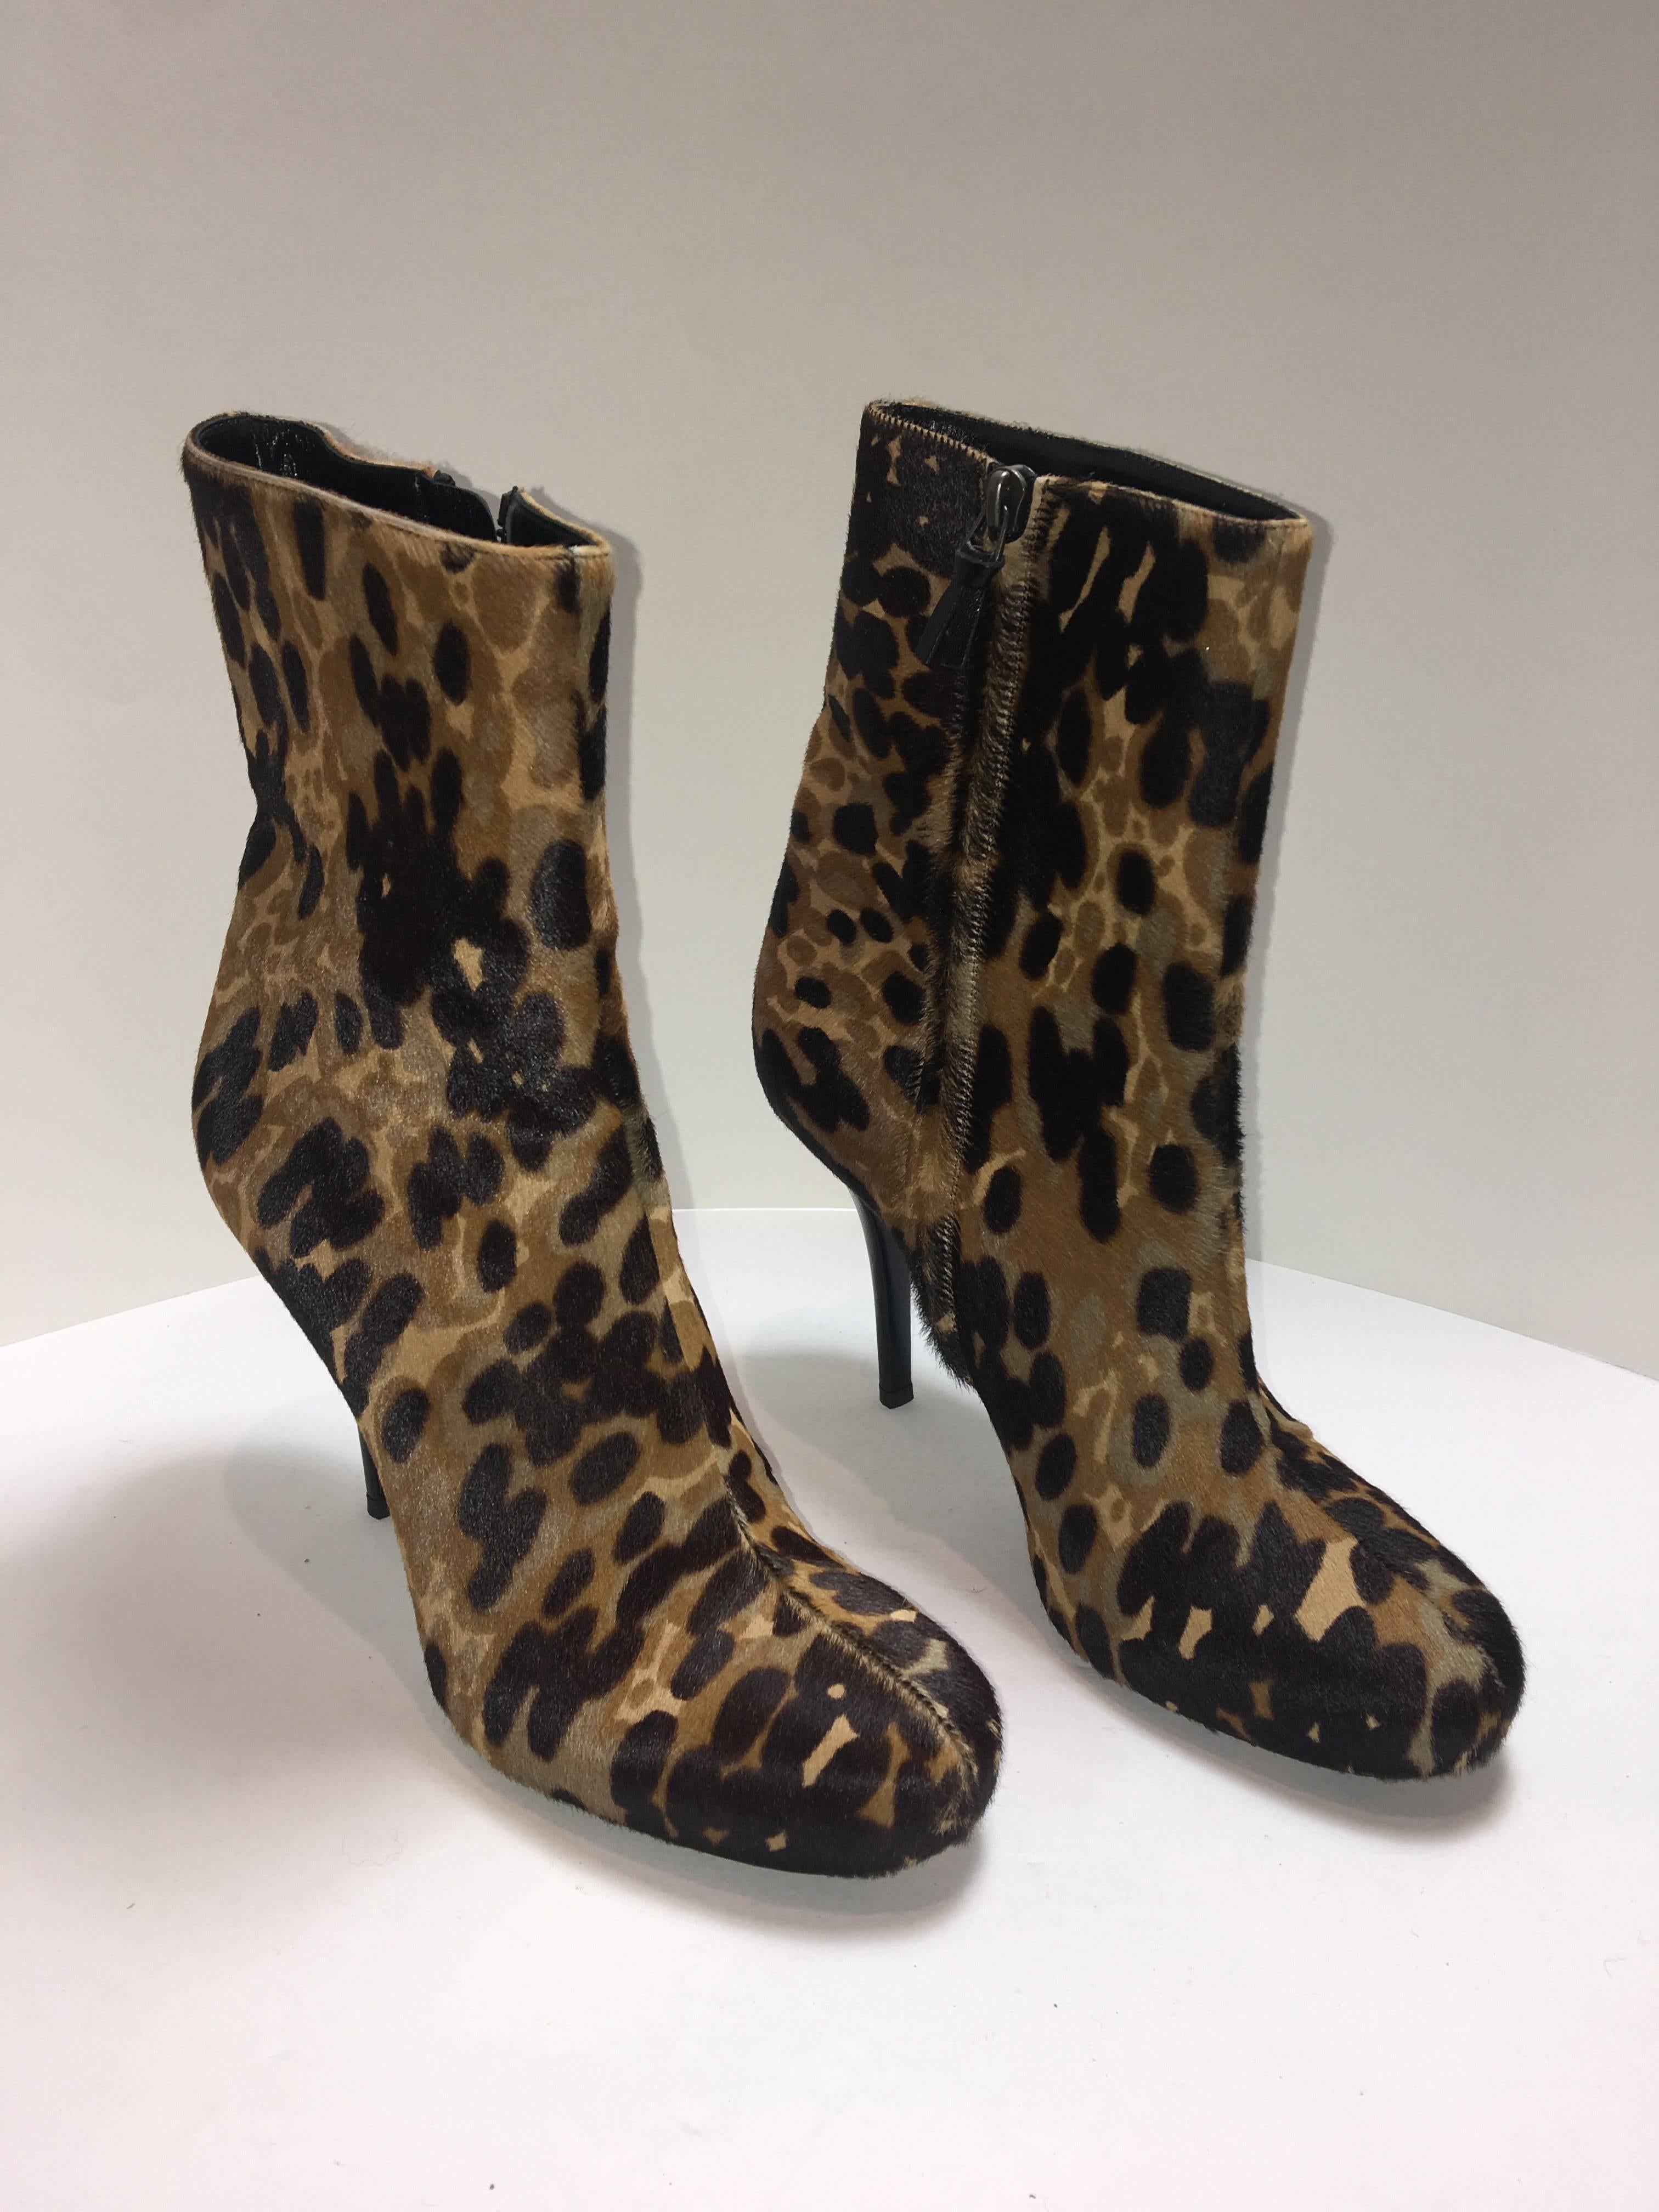 Balenciaga Black and Brown Pony Hair Boots. Round Toe, Above- the-Ankle with a small Heel. Size 40.5.